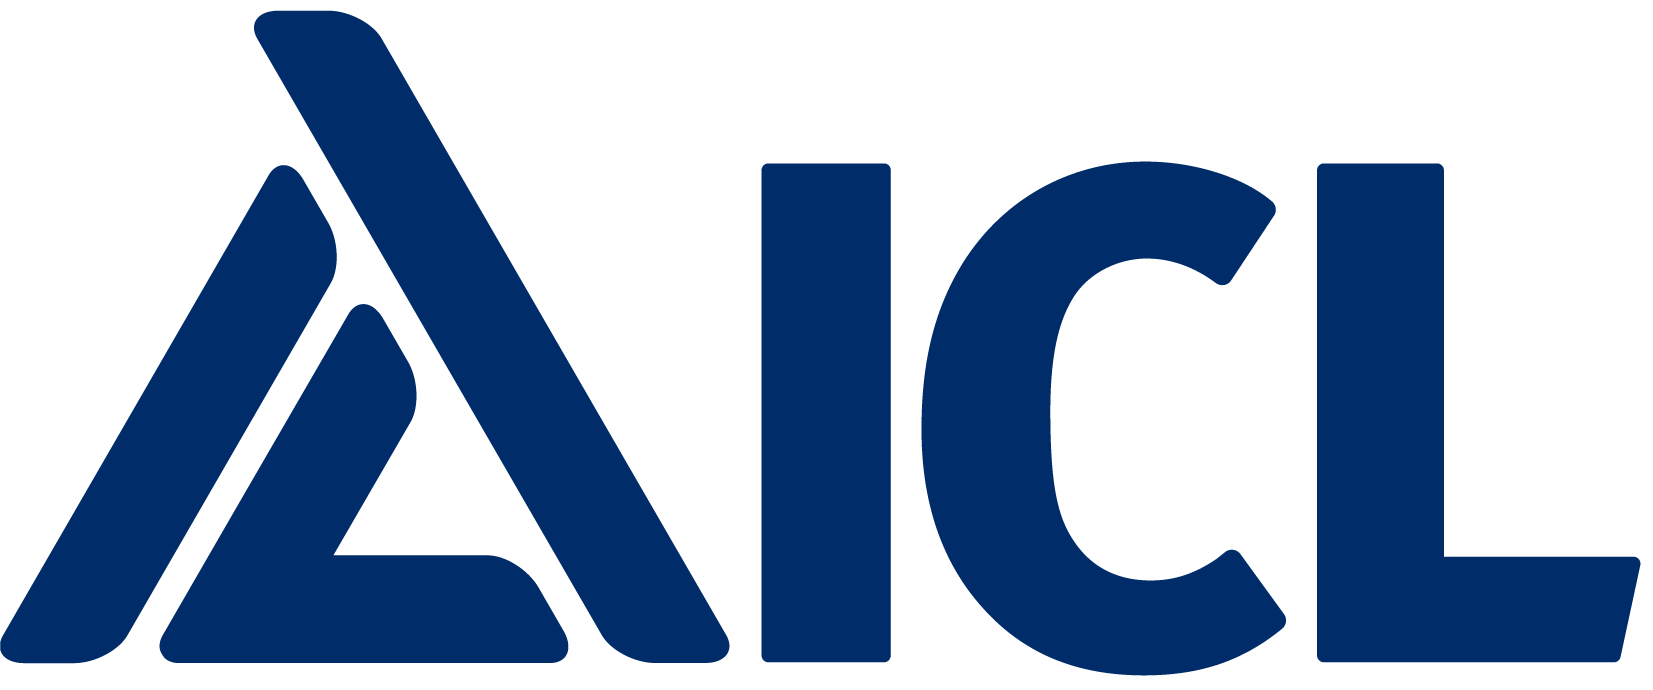 ICL. ICL Group. AICL logo. ICL Group logo.